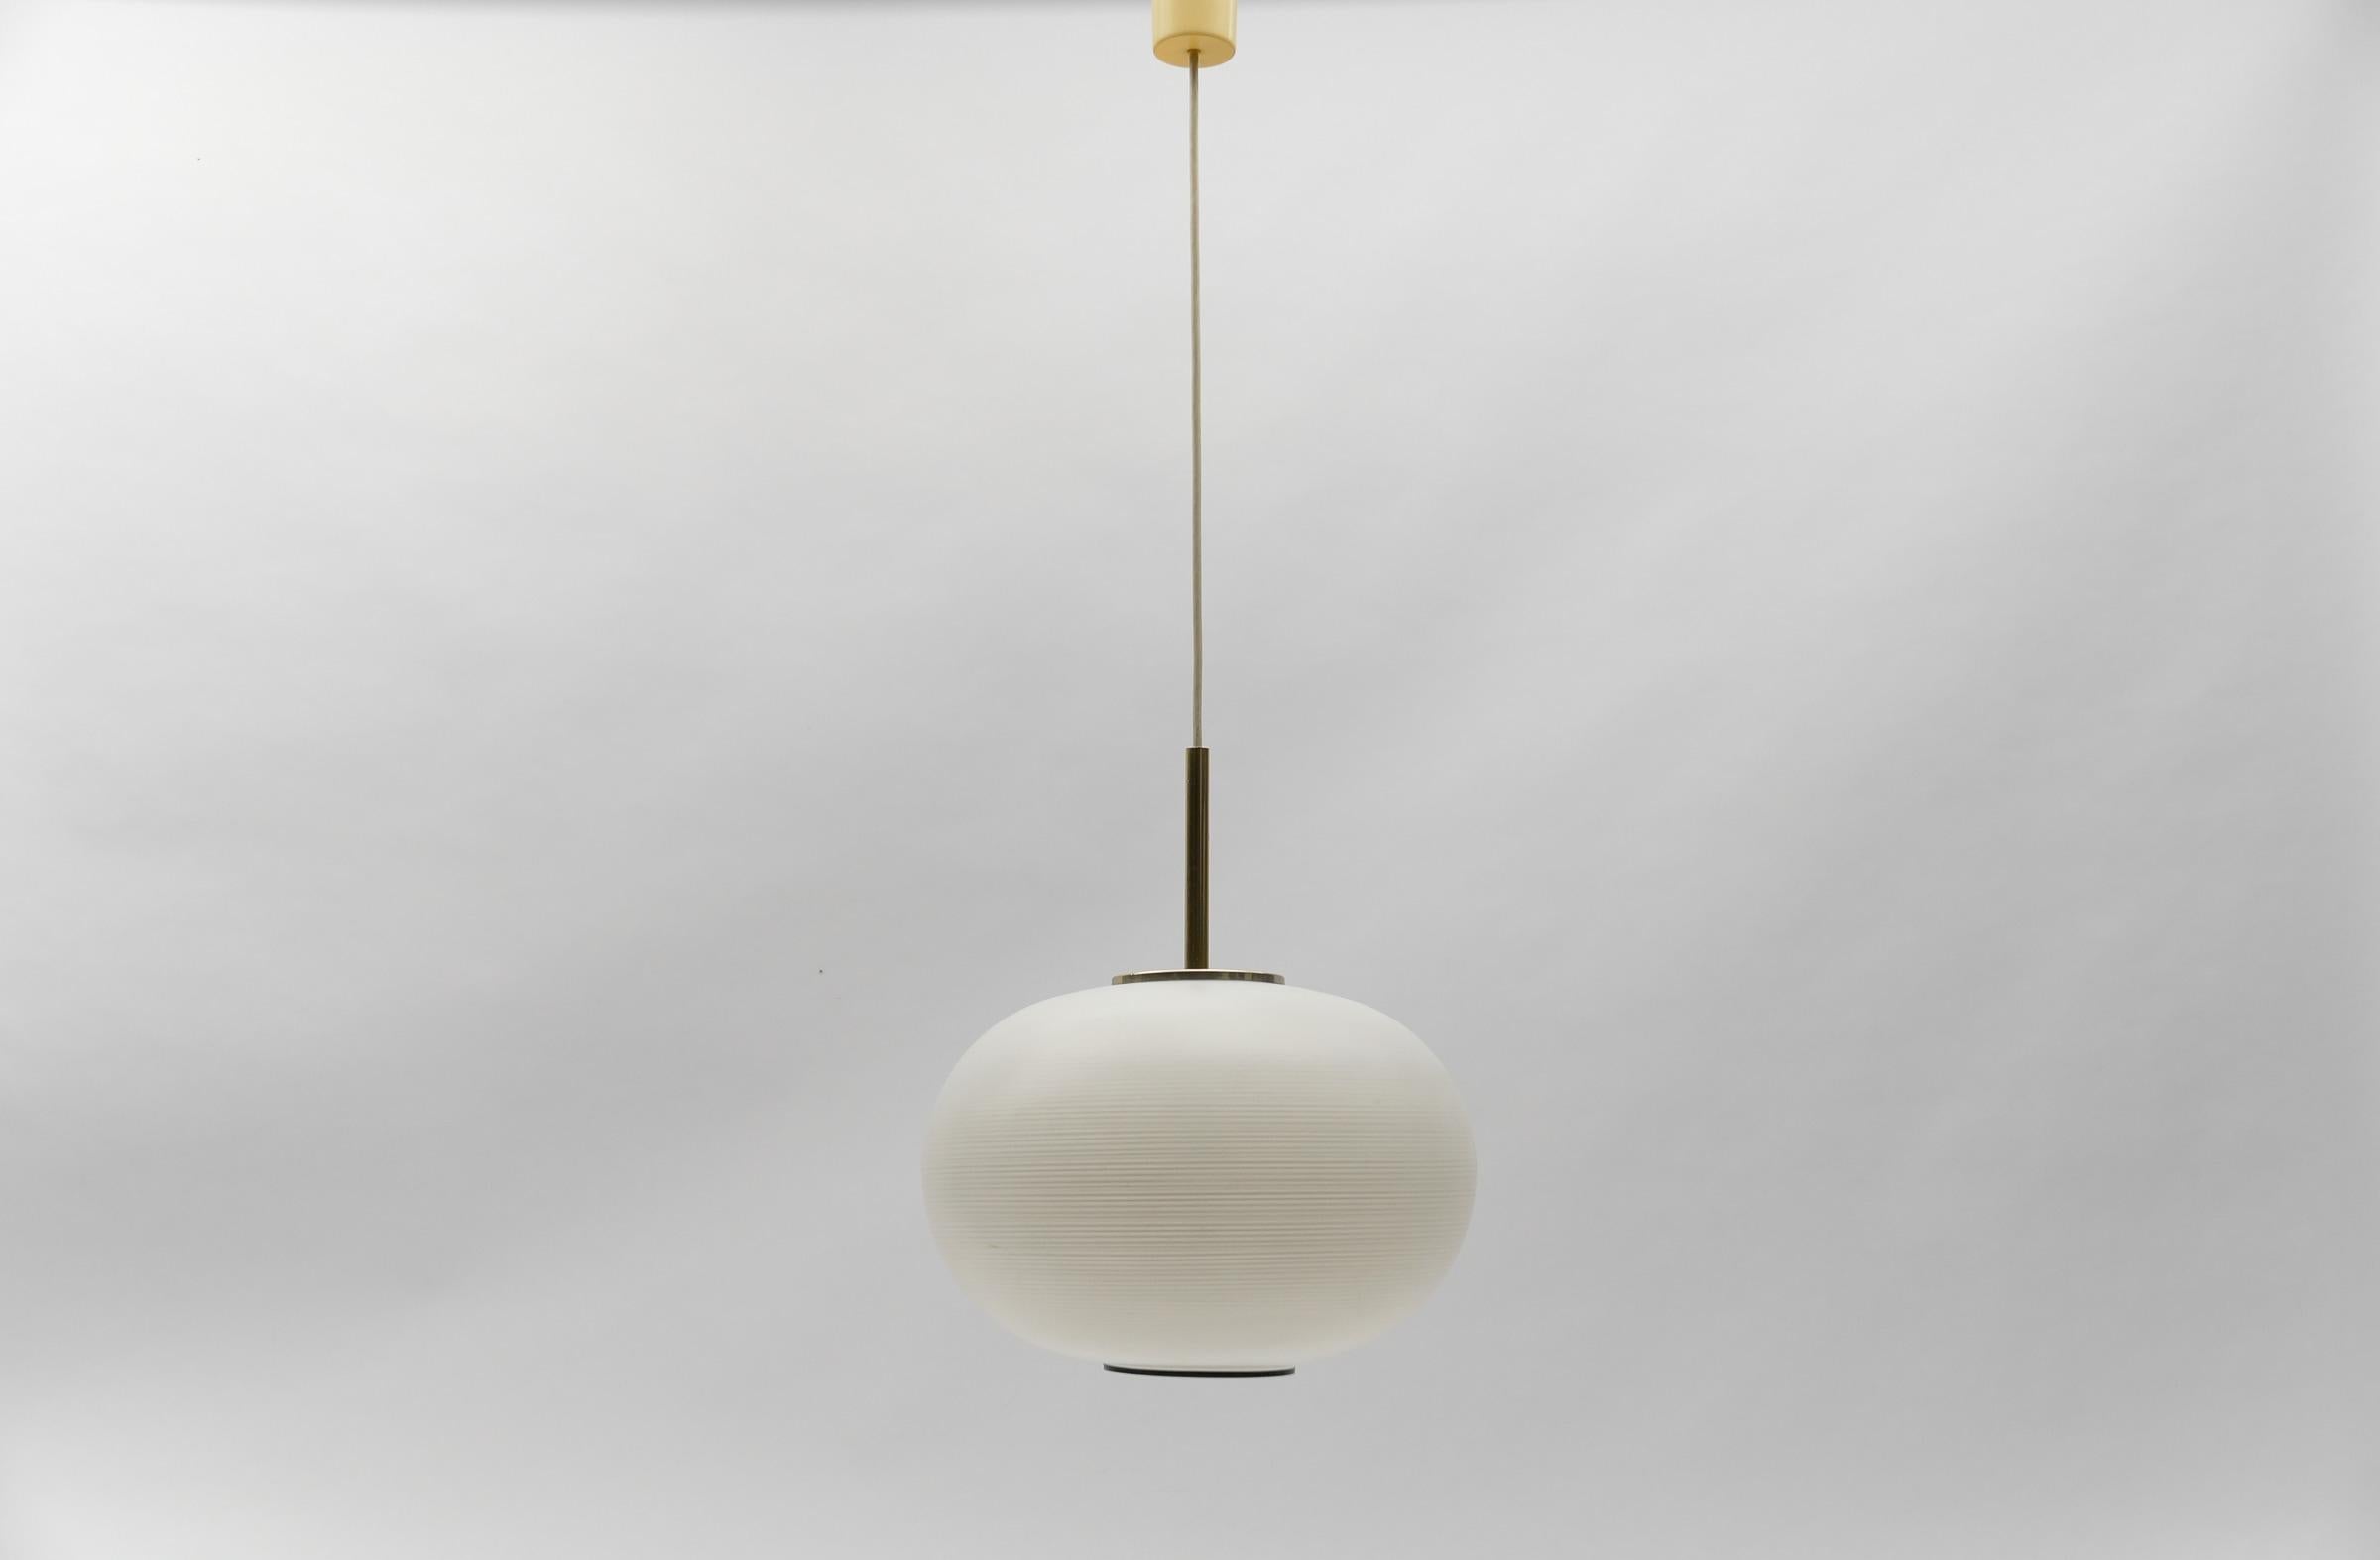 Mid Century Modern Opaline Glass Ball Pendant Lamp by Doria, 1960s Germany

Dimensions
Diameter: 14.96 in. (38 cm)
Height adjustable: 23.62 - 39.37 in. (60 - 100 cm)

One E27 socket. Works with 220V and 110V.

Our lamps are checked, cleaned and are